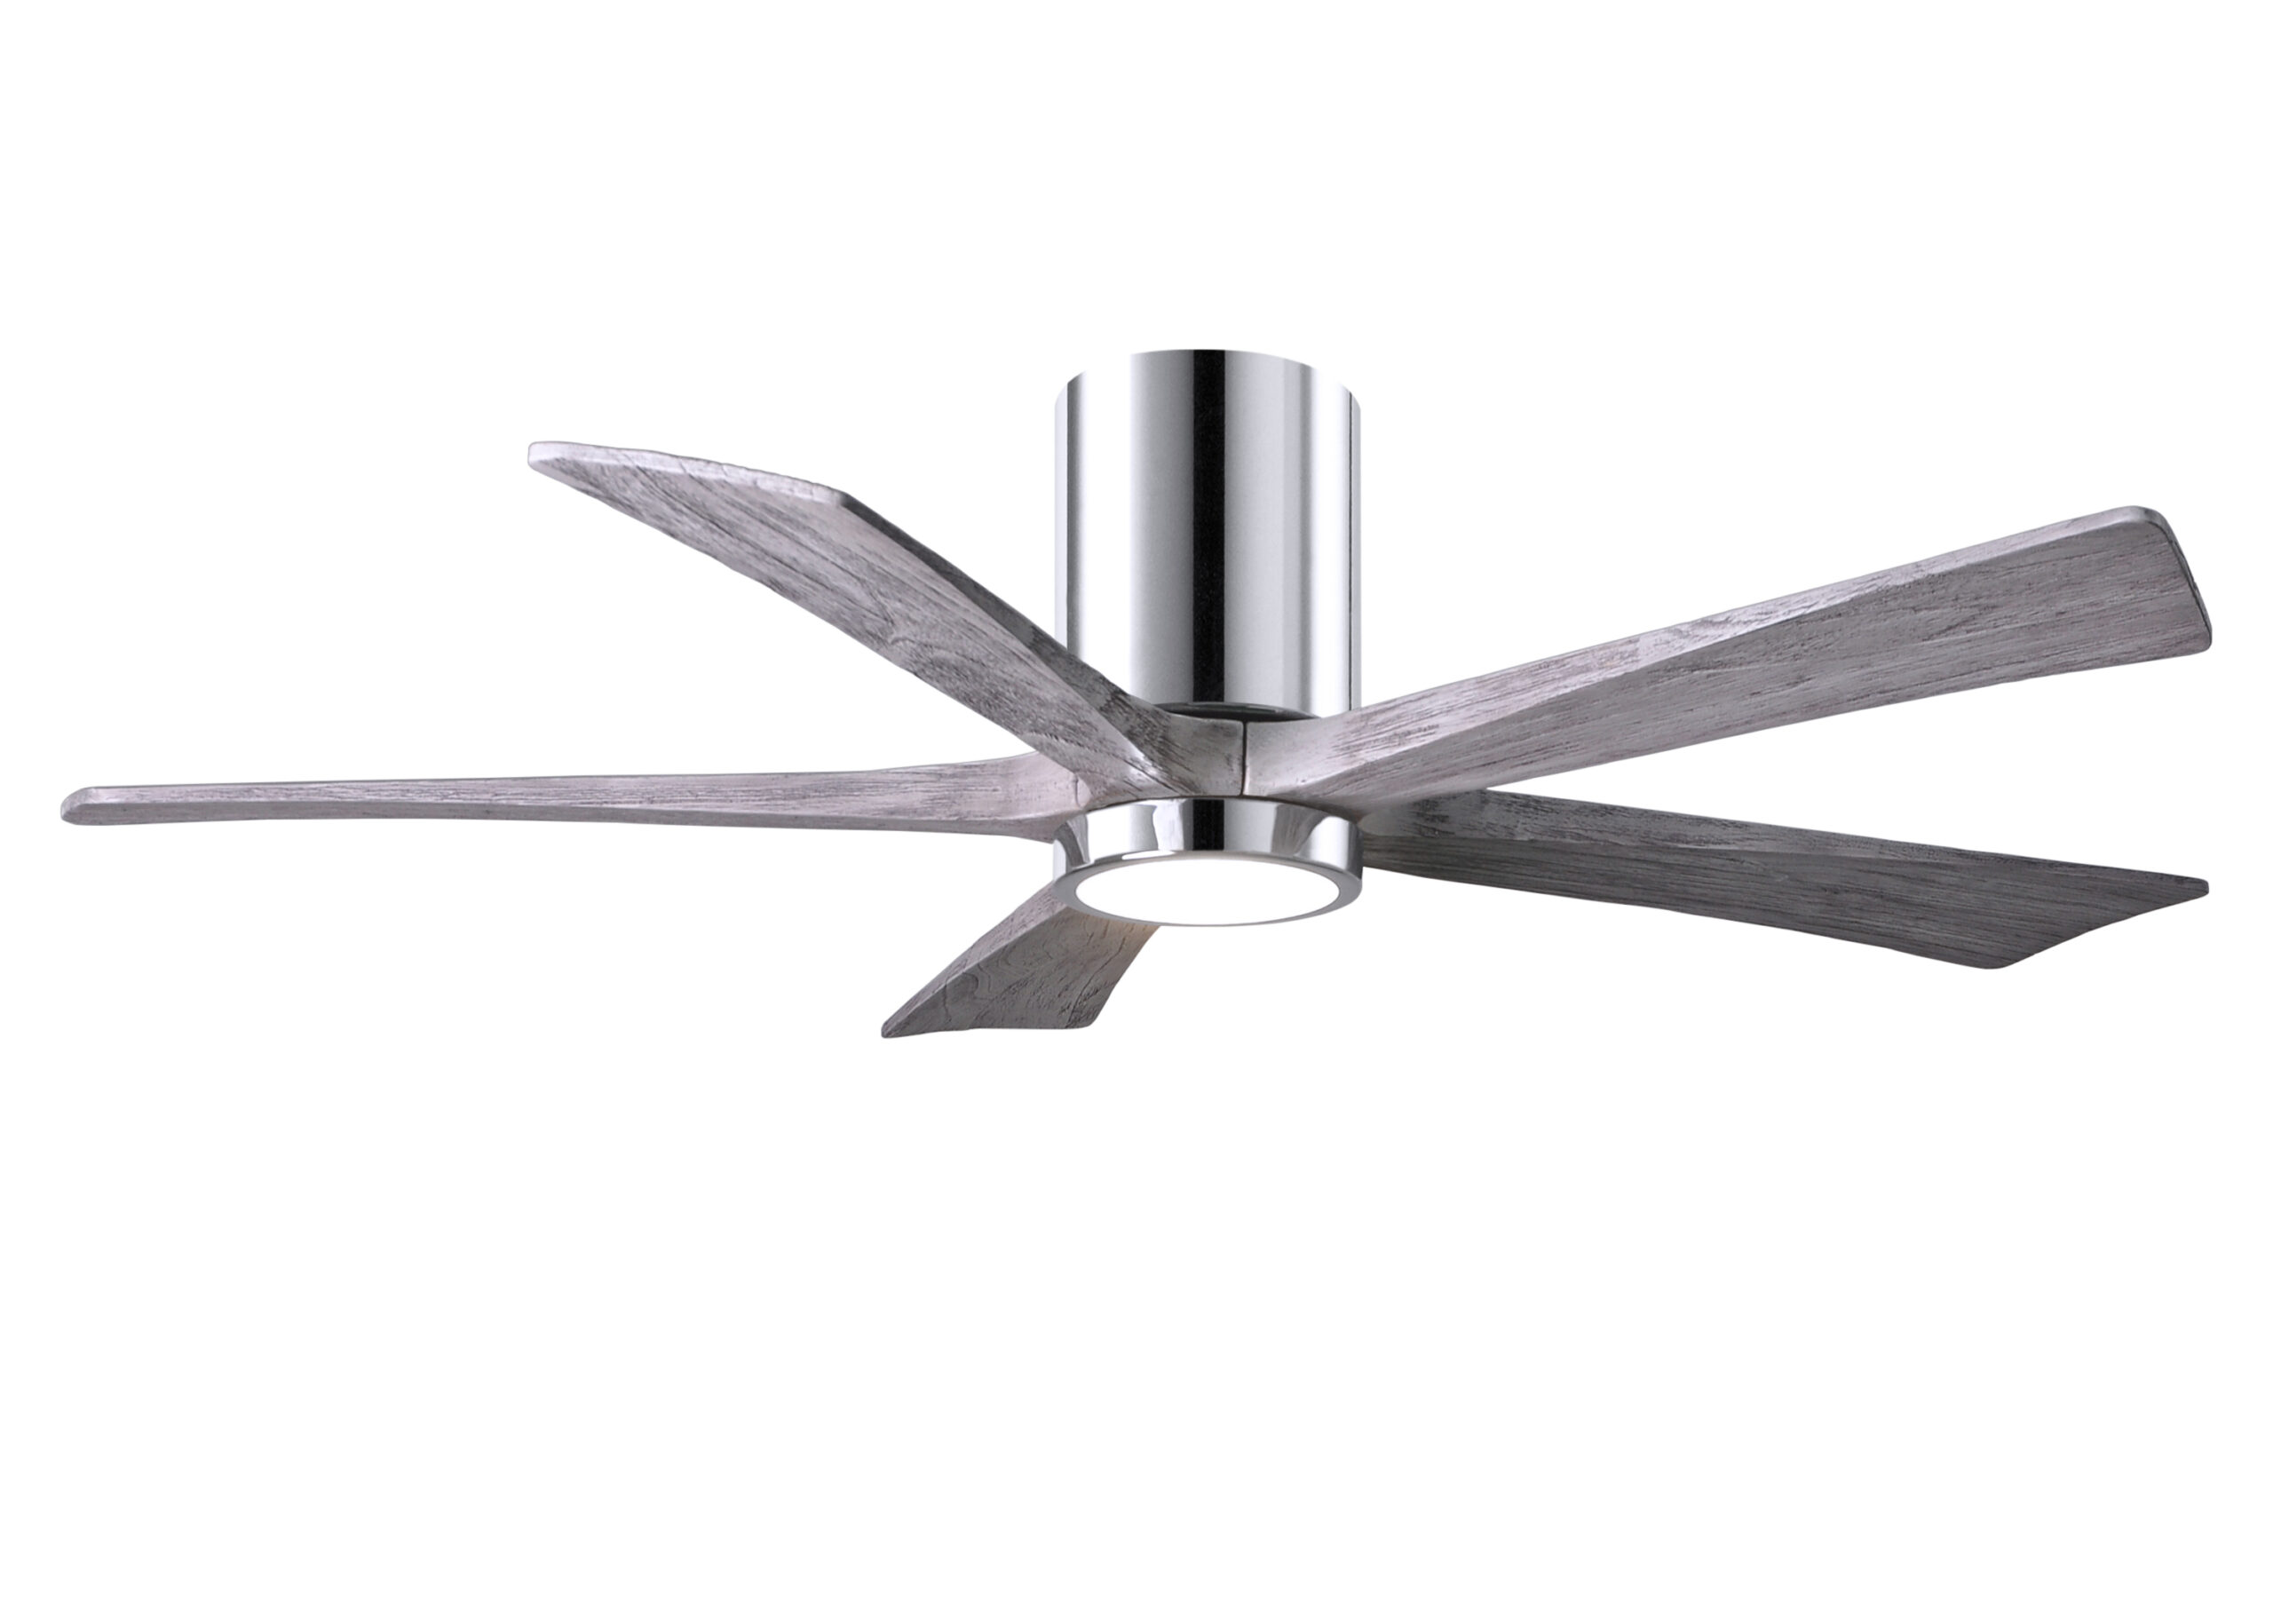 Irene-5HLK Ceiling Fan in Polished Chrome Finish with 52